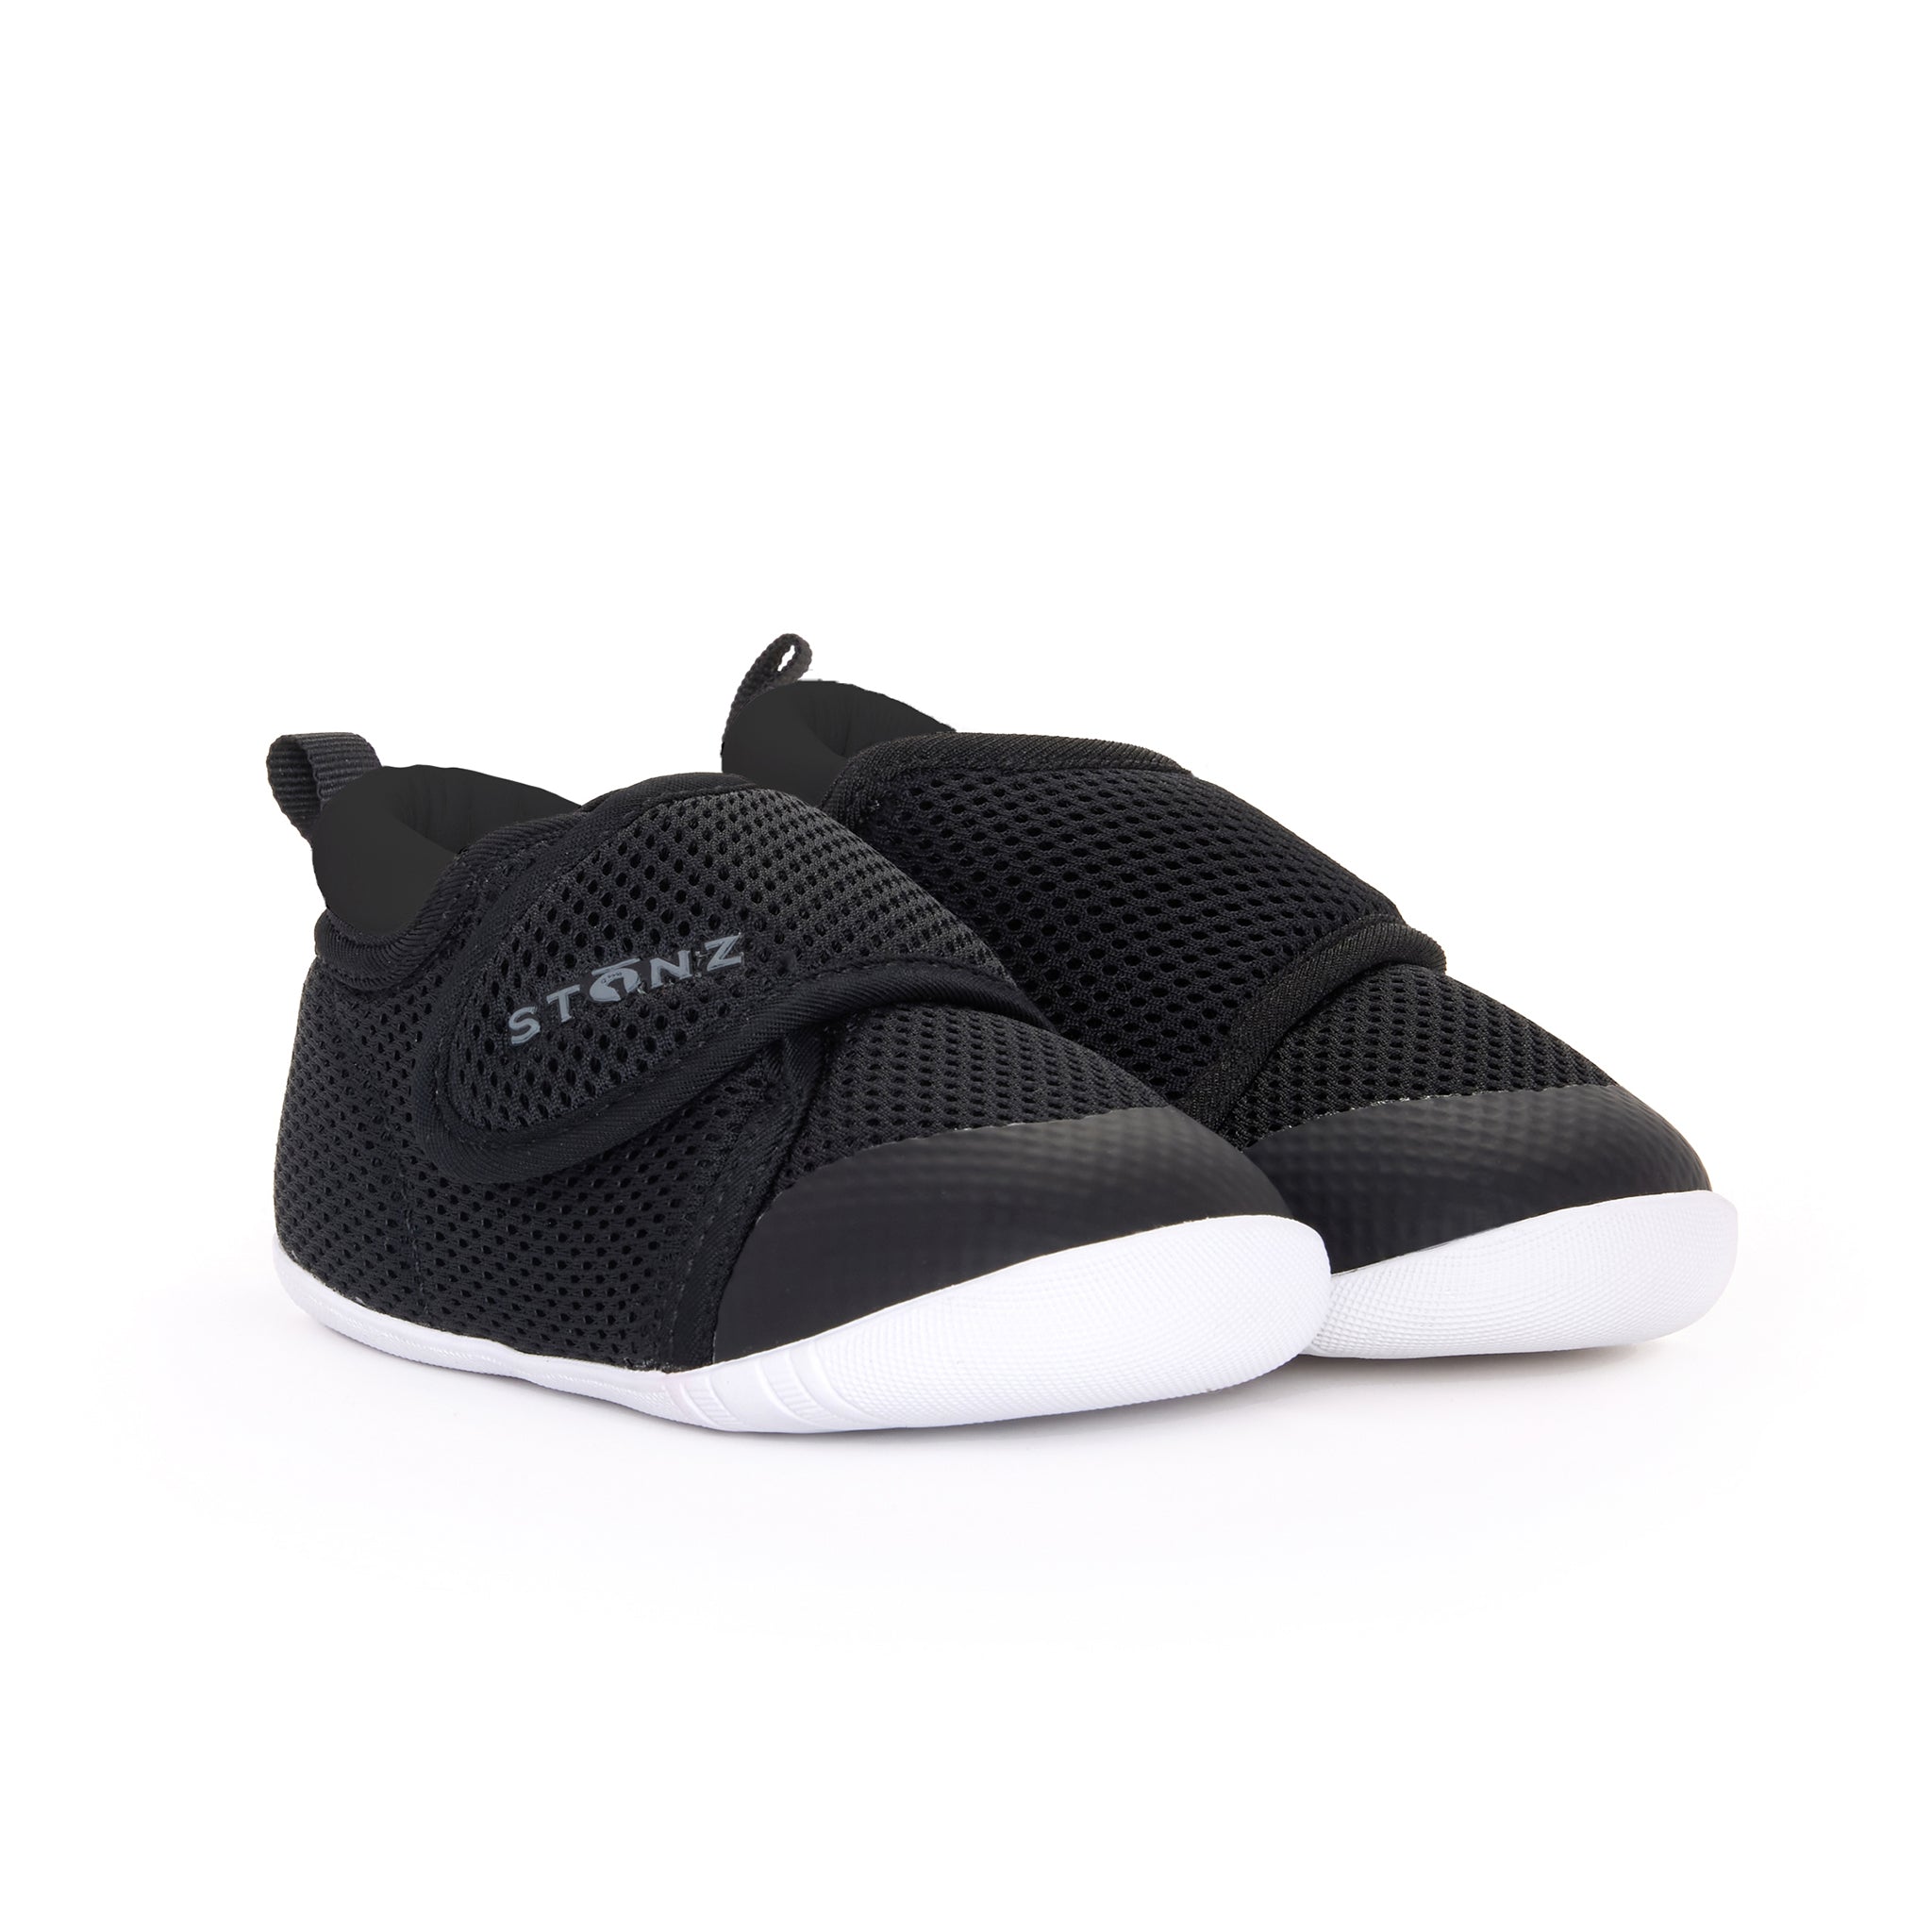 Stonz cruiser shoe for early walkers